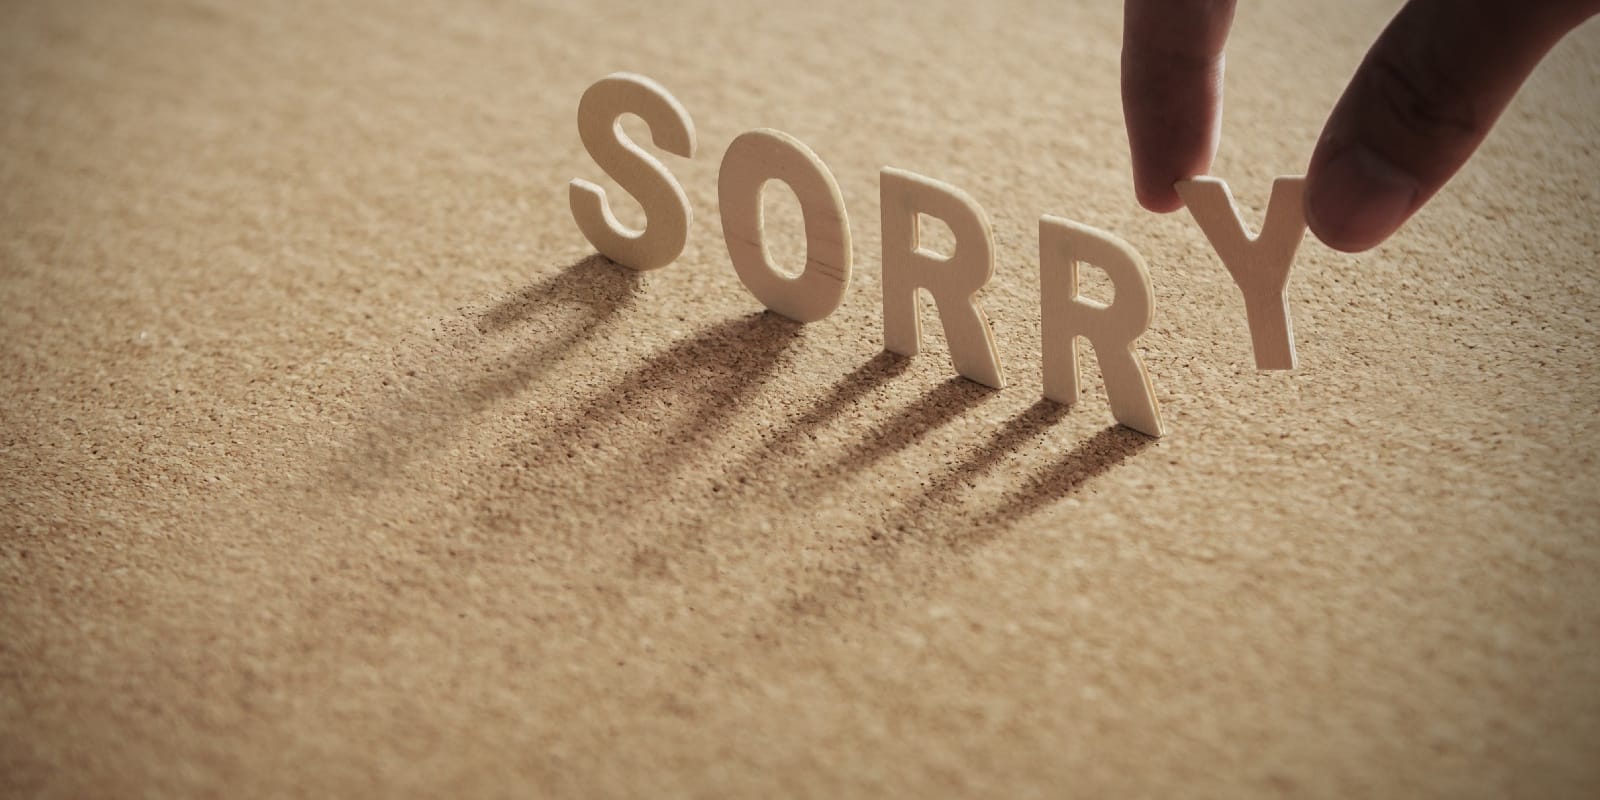 We Need To Stop Saying Sorry Unless We Mean It